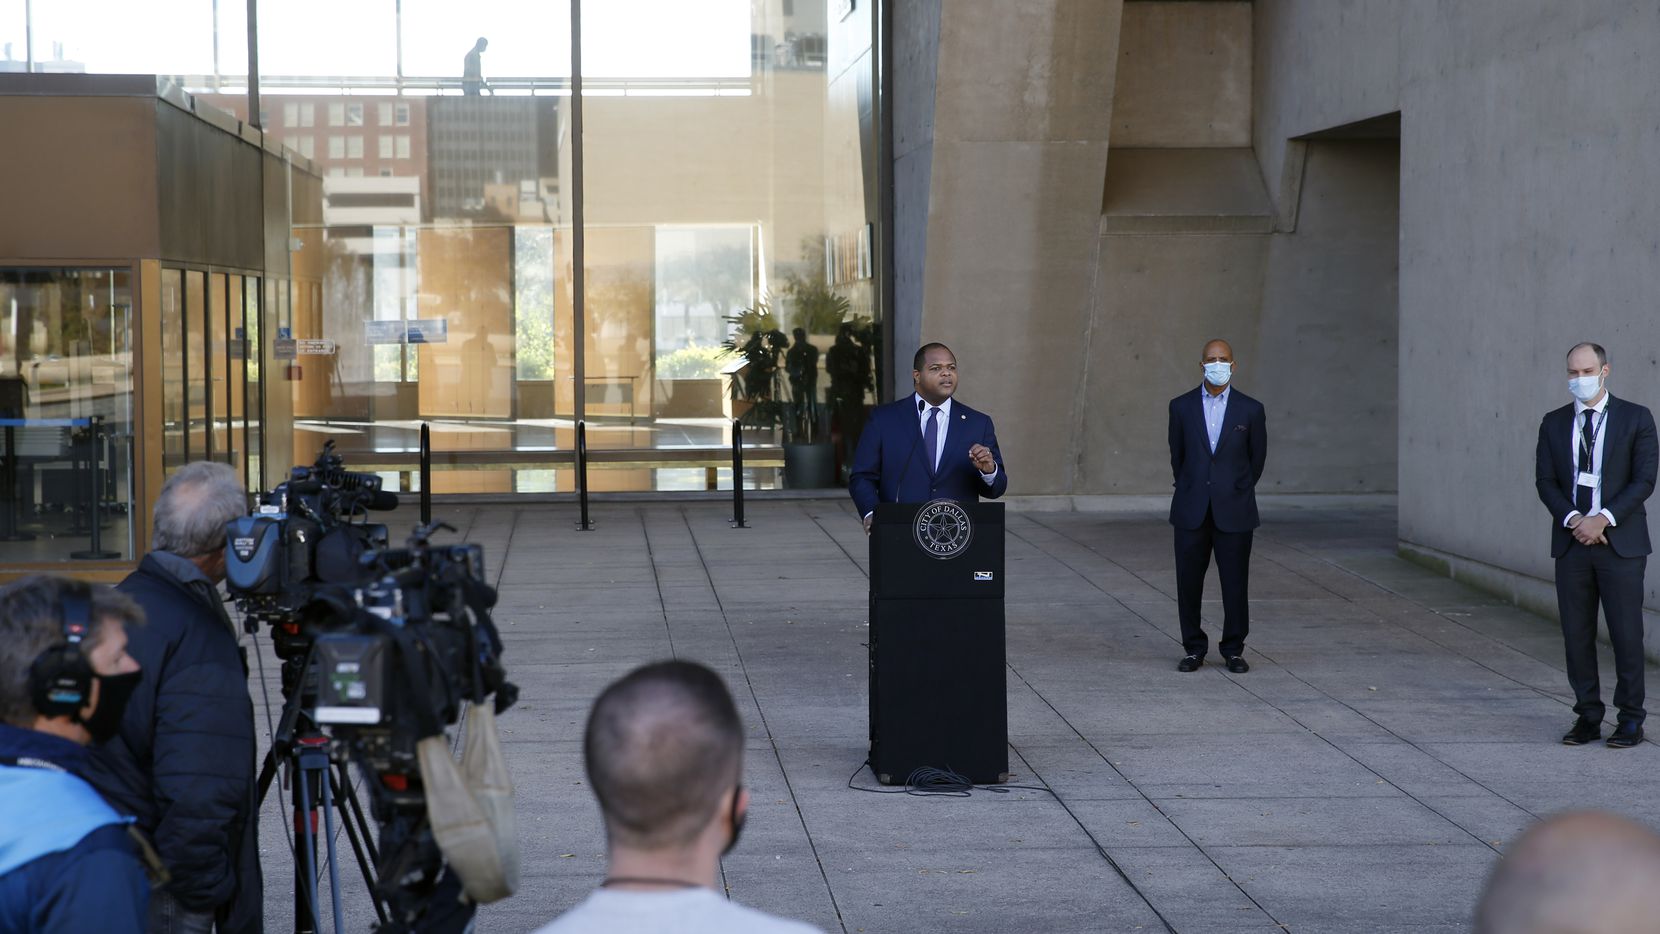 Mayor Eric Johnson speaks during a press conference in front of Dallas City Hall on Nov. 18, 2020, in Dallas.